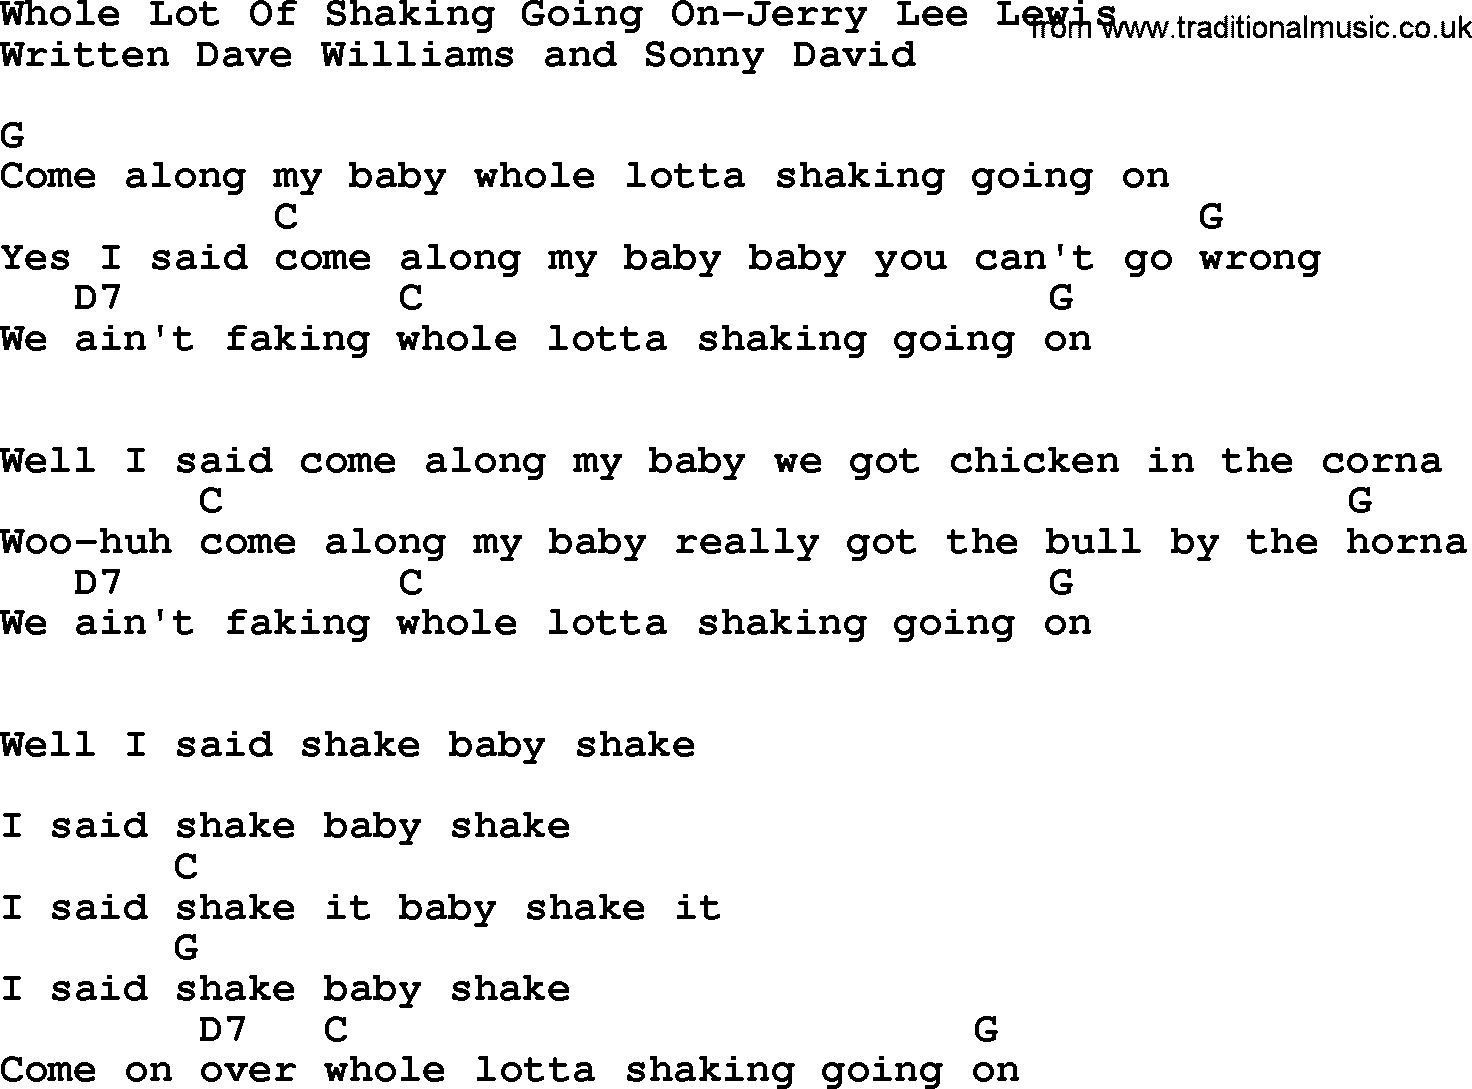 Country music song: Whole Lot Of Shaking Going On-Jerry Lee Lewis lyrics and chords